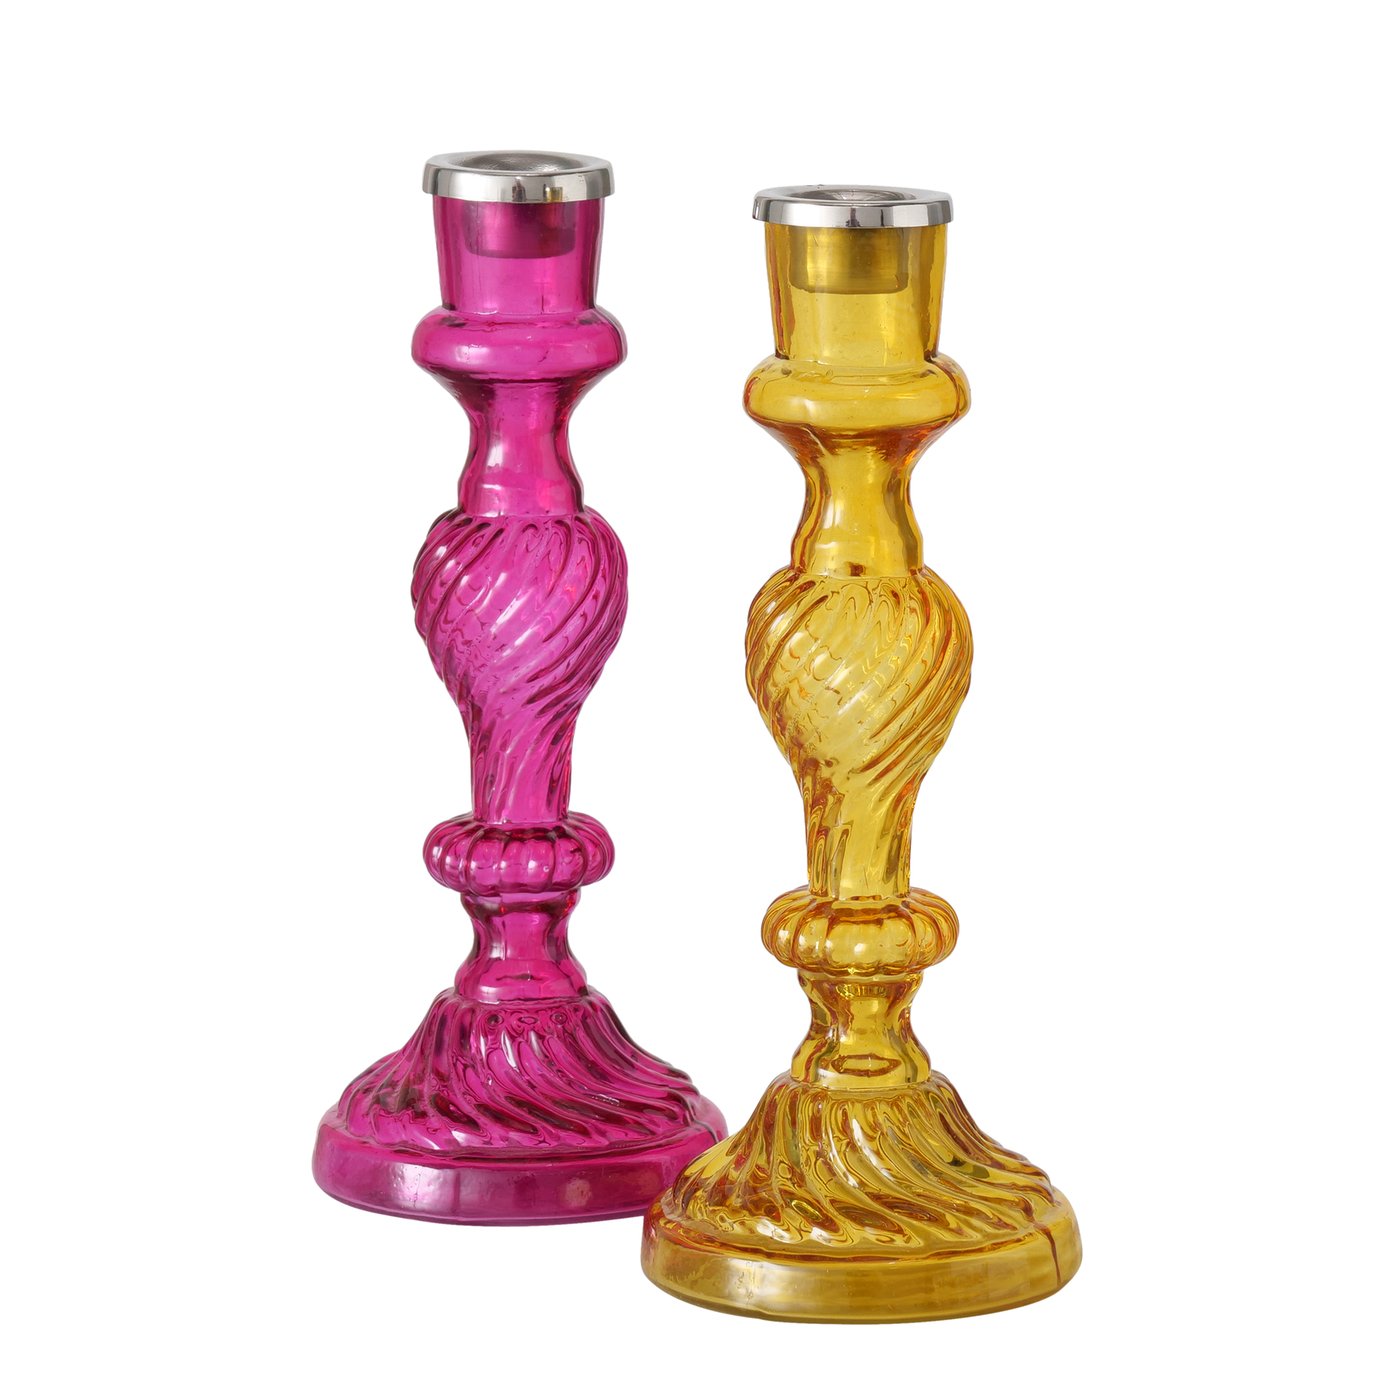 &Quirky Caya Glass Candleholder : Pink or Yellow